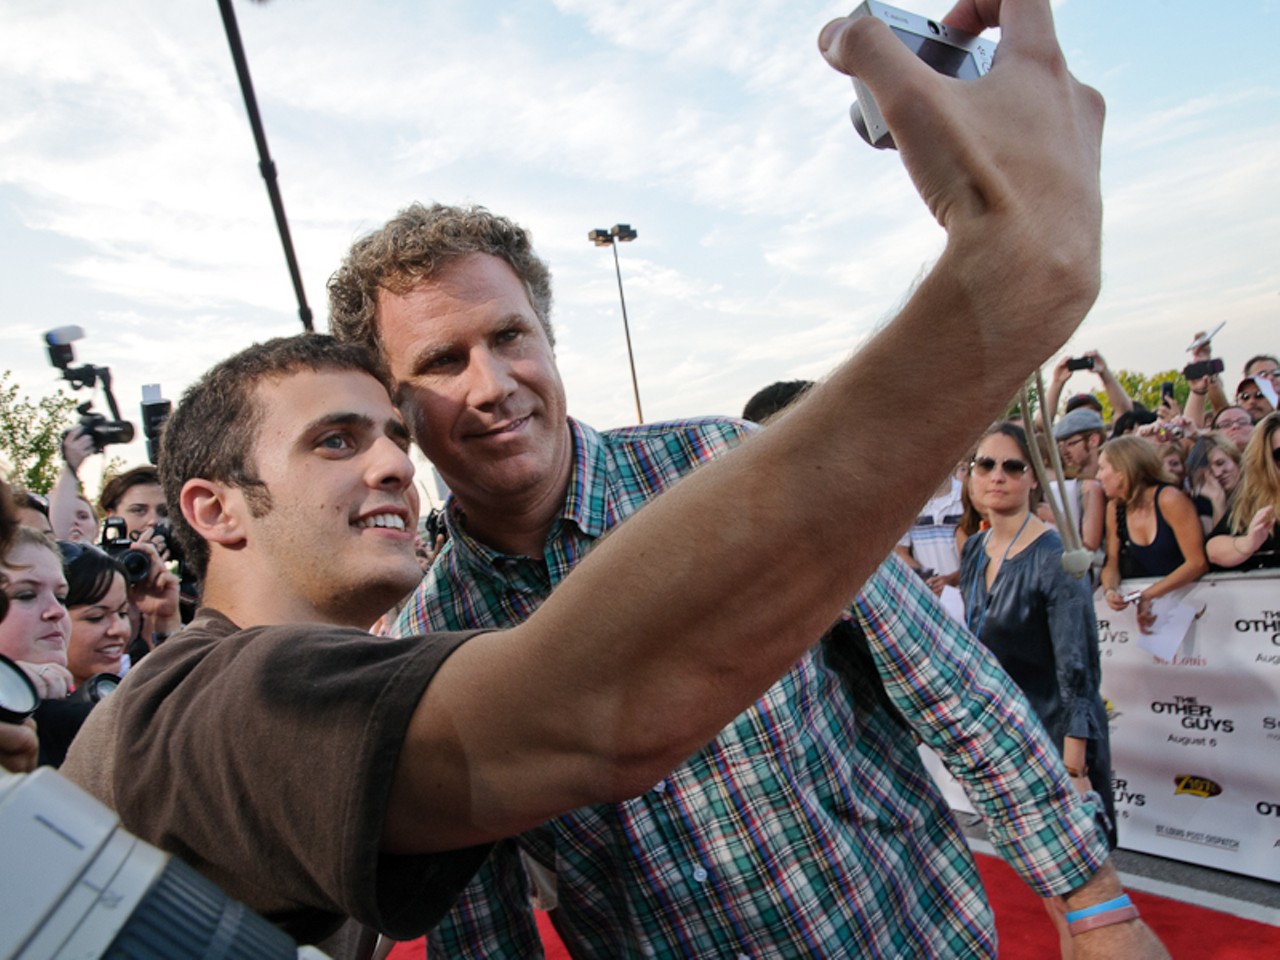 Will Ferrell took photos with a fans - including this one, who found his way into the press area.